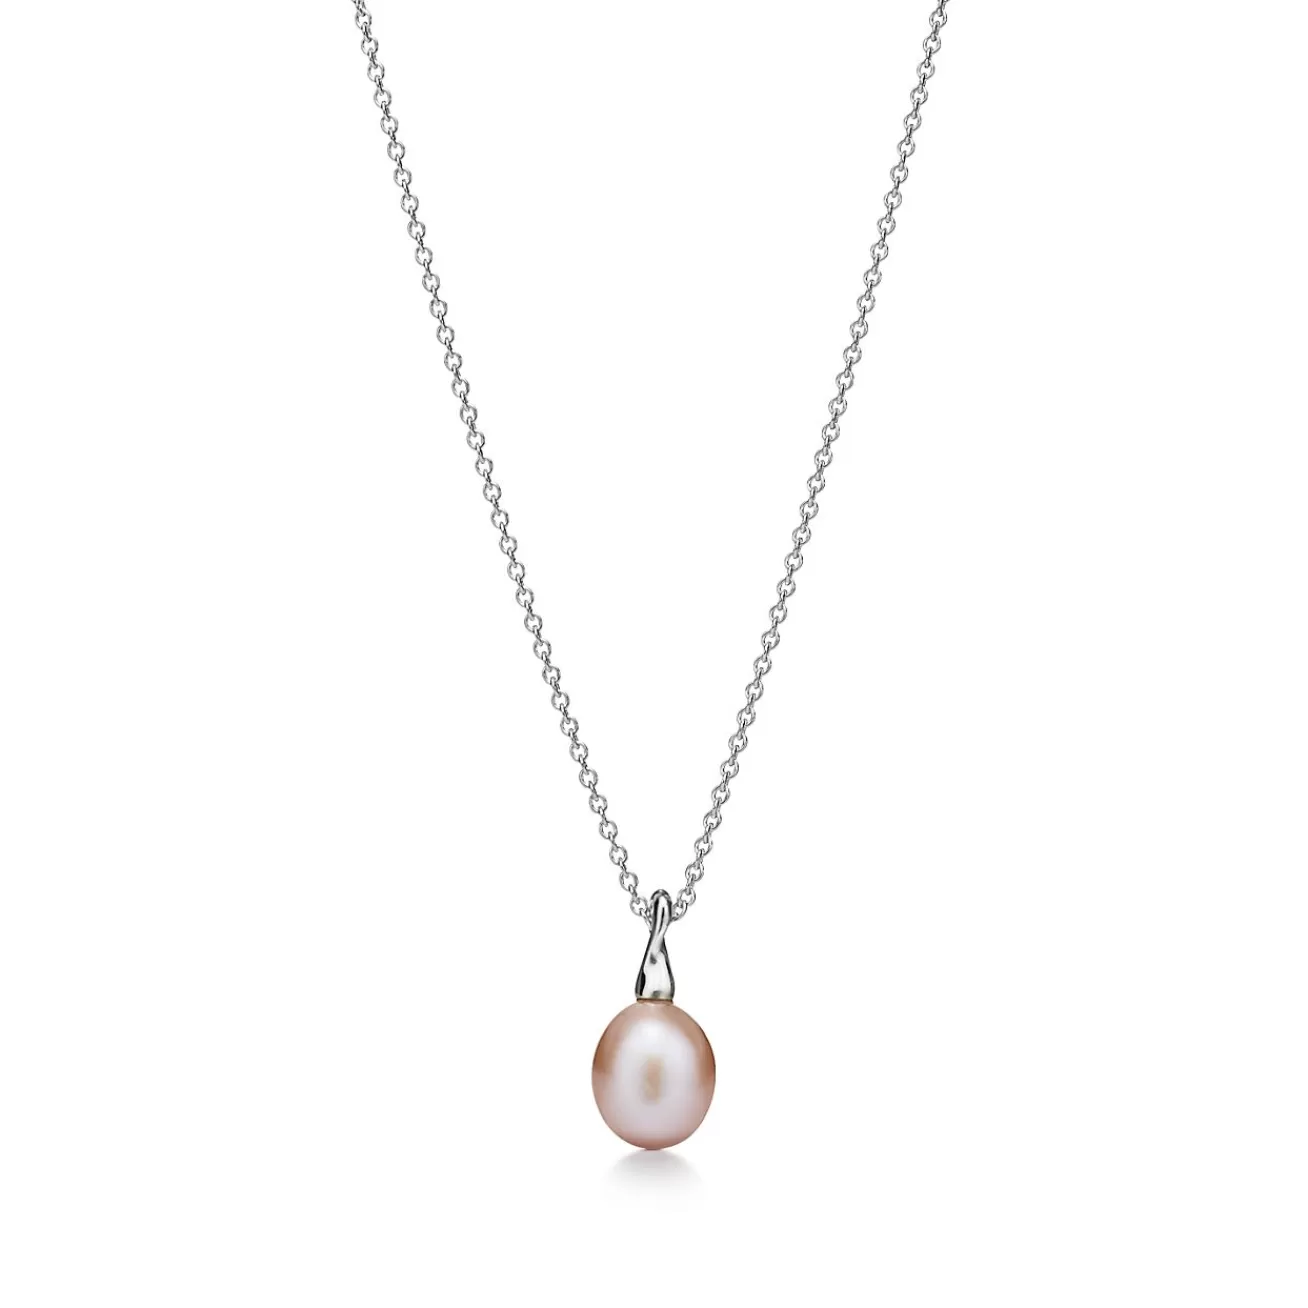 Tiffany & Co. Elsa Peretti® Cat Island pendant in silver with a freshwater cultured pearl. | ^ Necklaces & Pendants | Sterling Silver Jewelry